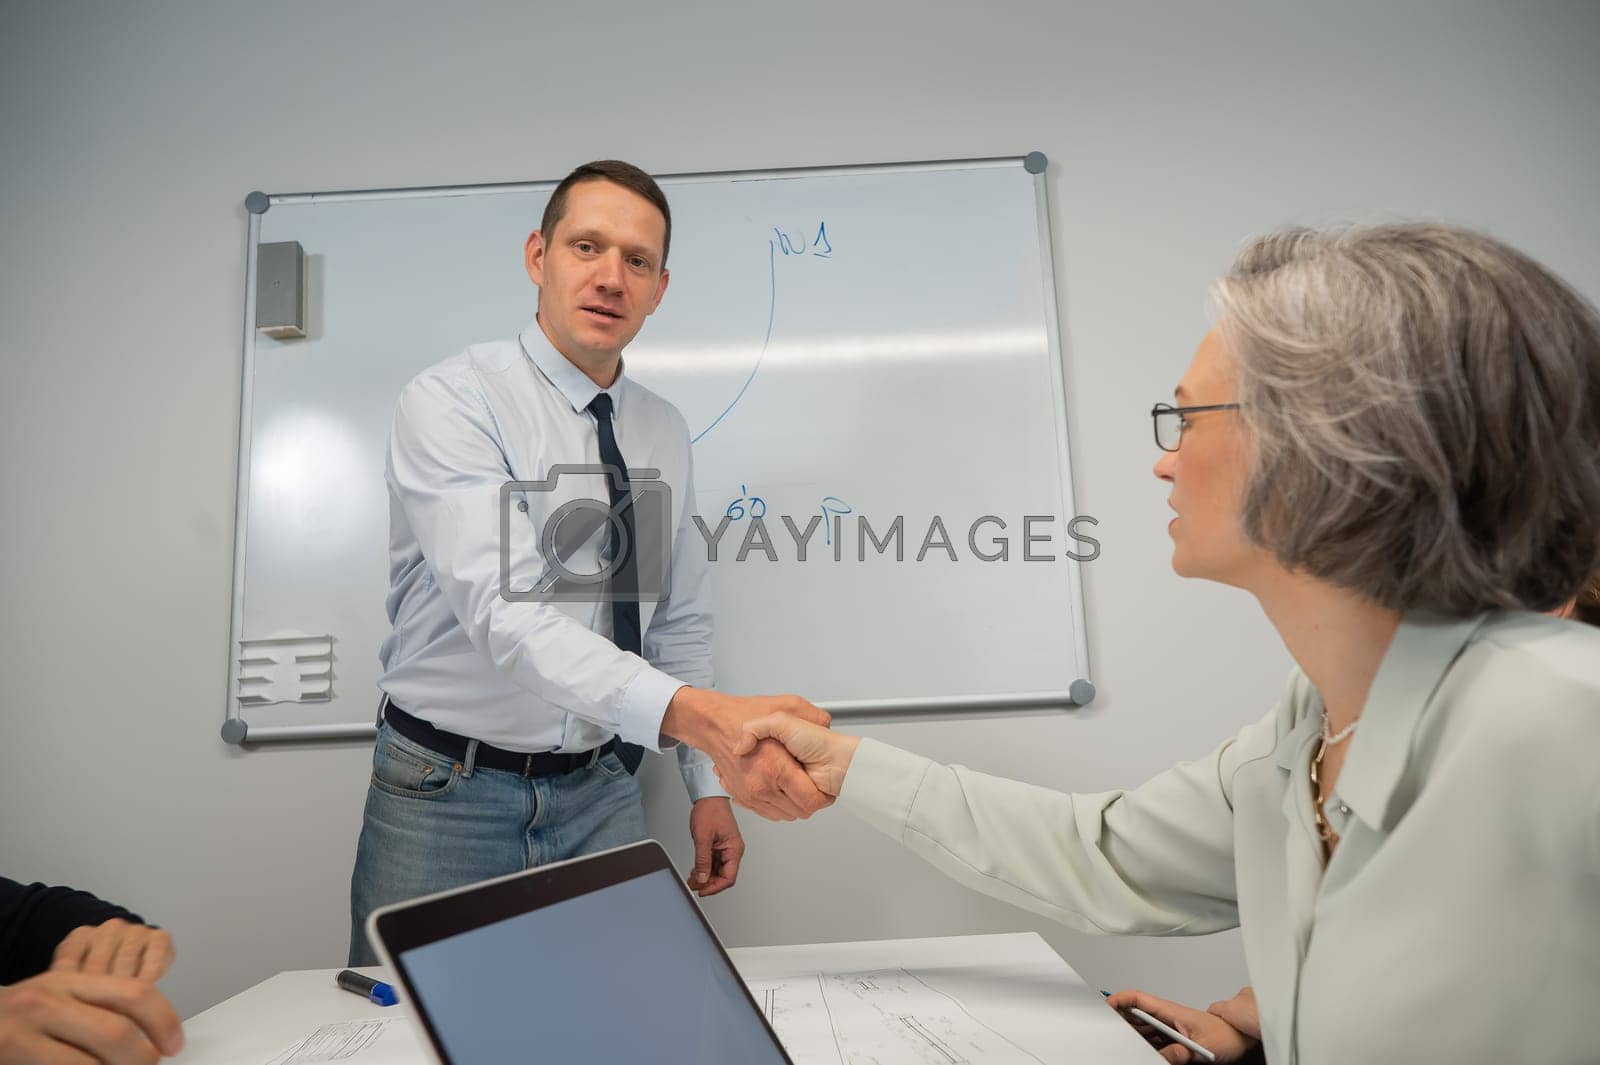 Royalty free image of The boss makes a presentation to subordinates at the white board. Caucasian man shaking hands with middle aged woman. by mrwed54